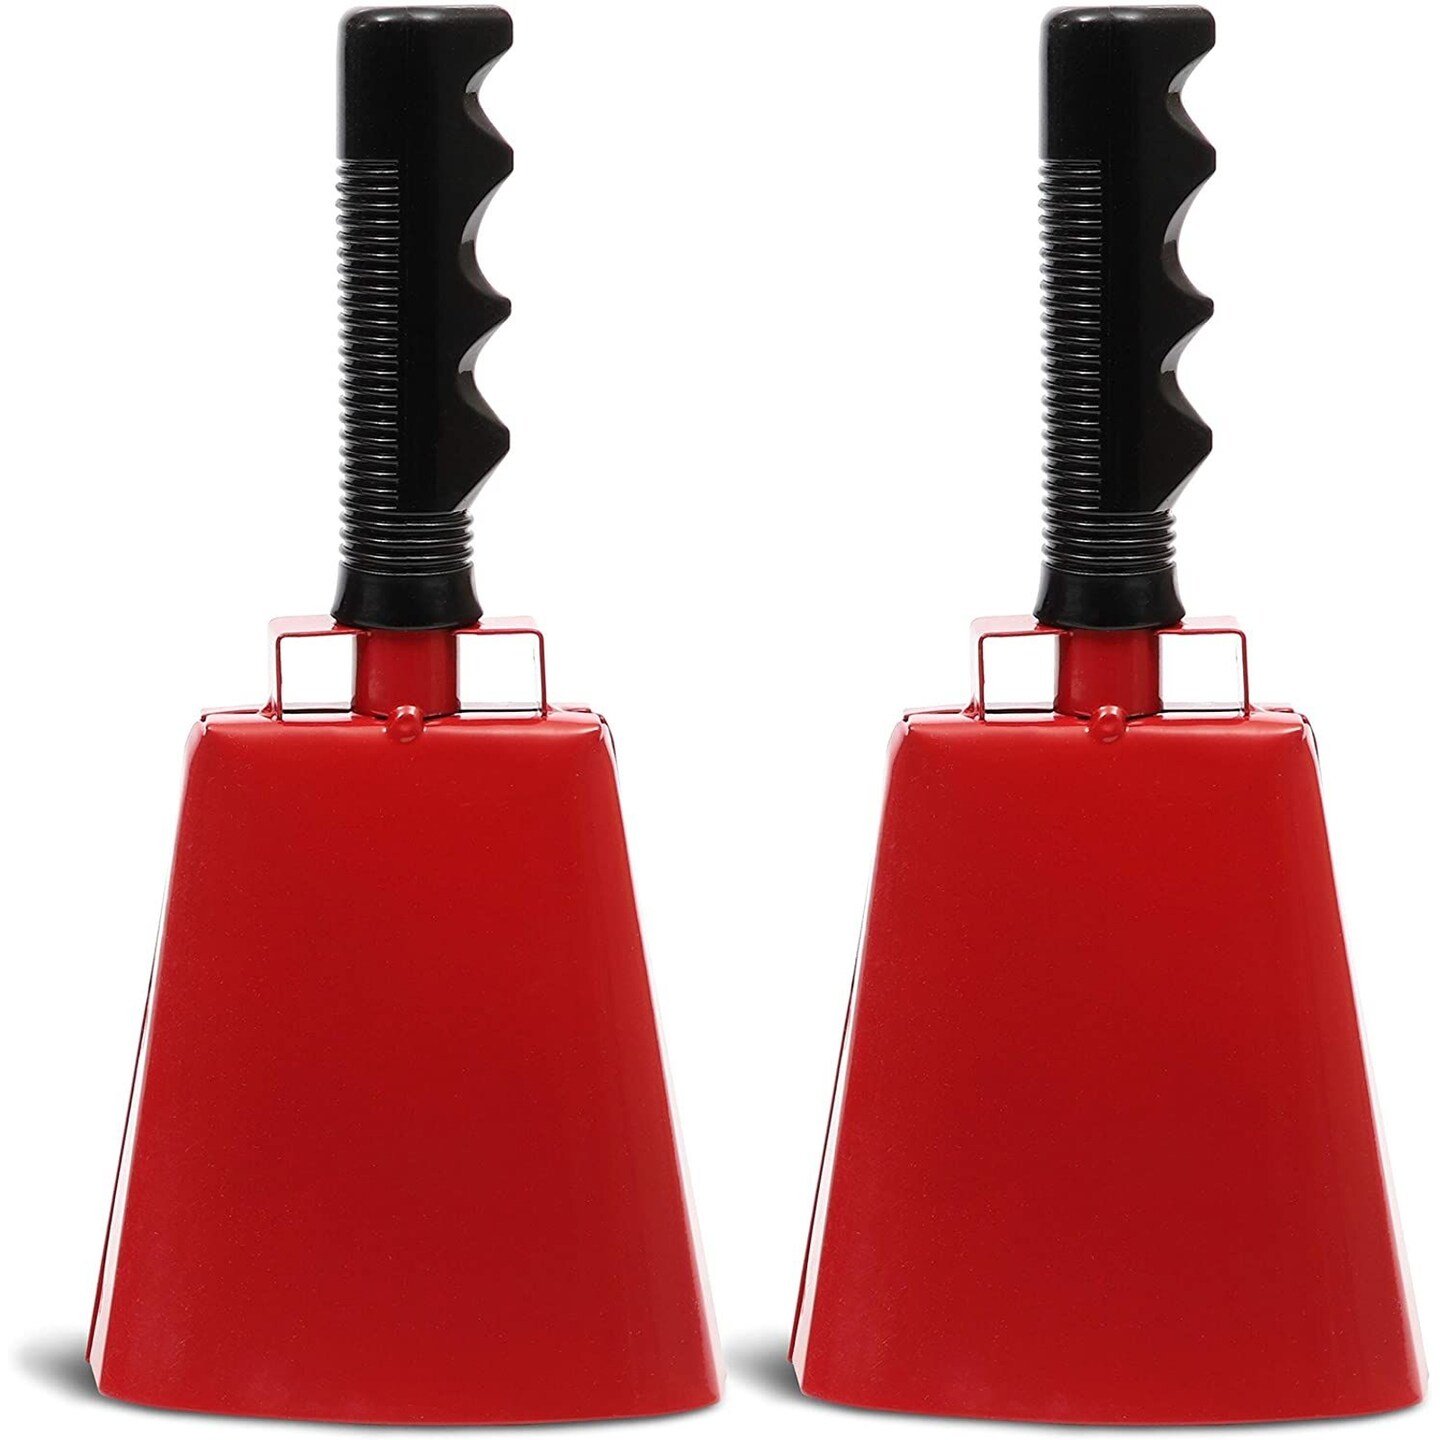 2 Pack 9.5-inch Cowbells for Sporting Events, Percussion Noise Makers with Handle for Football Games, Stadiums (Red)